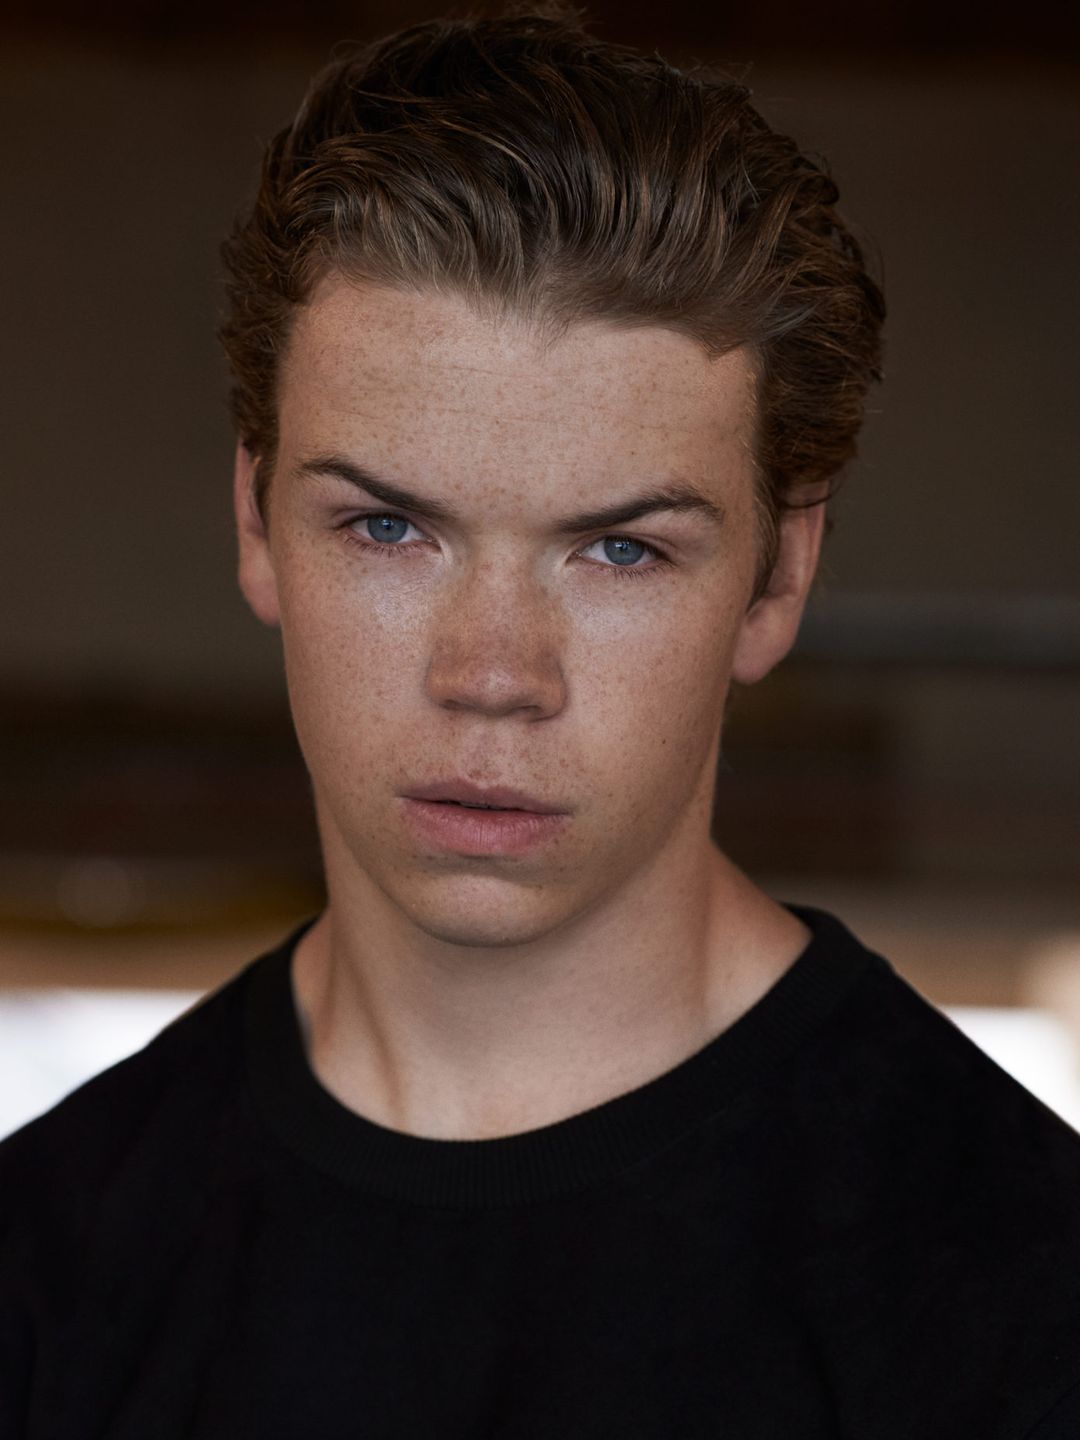 Will Poulter high school pics